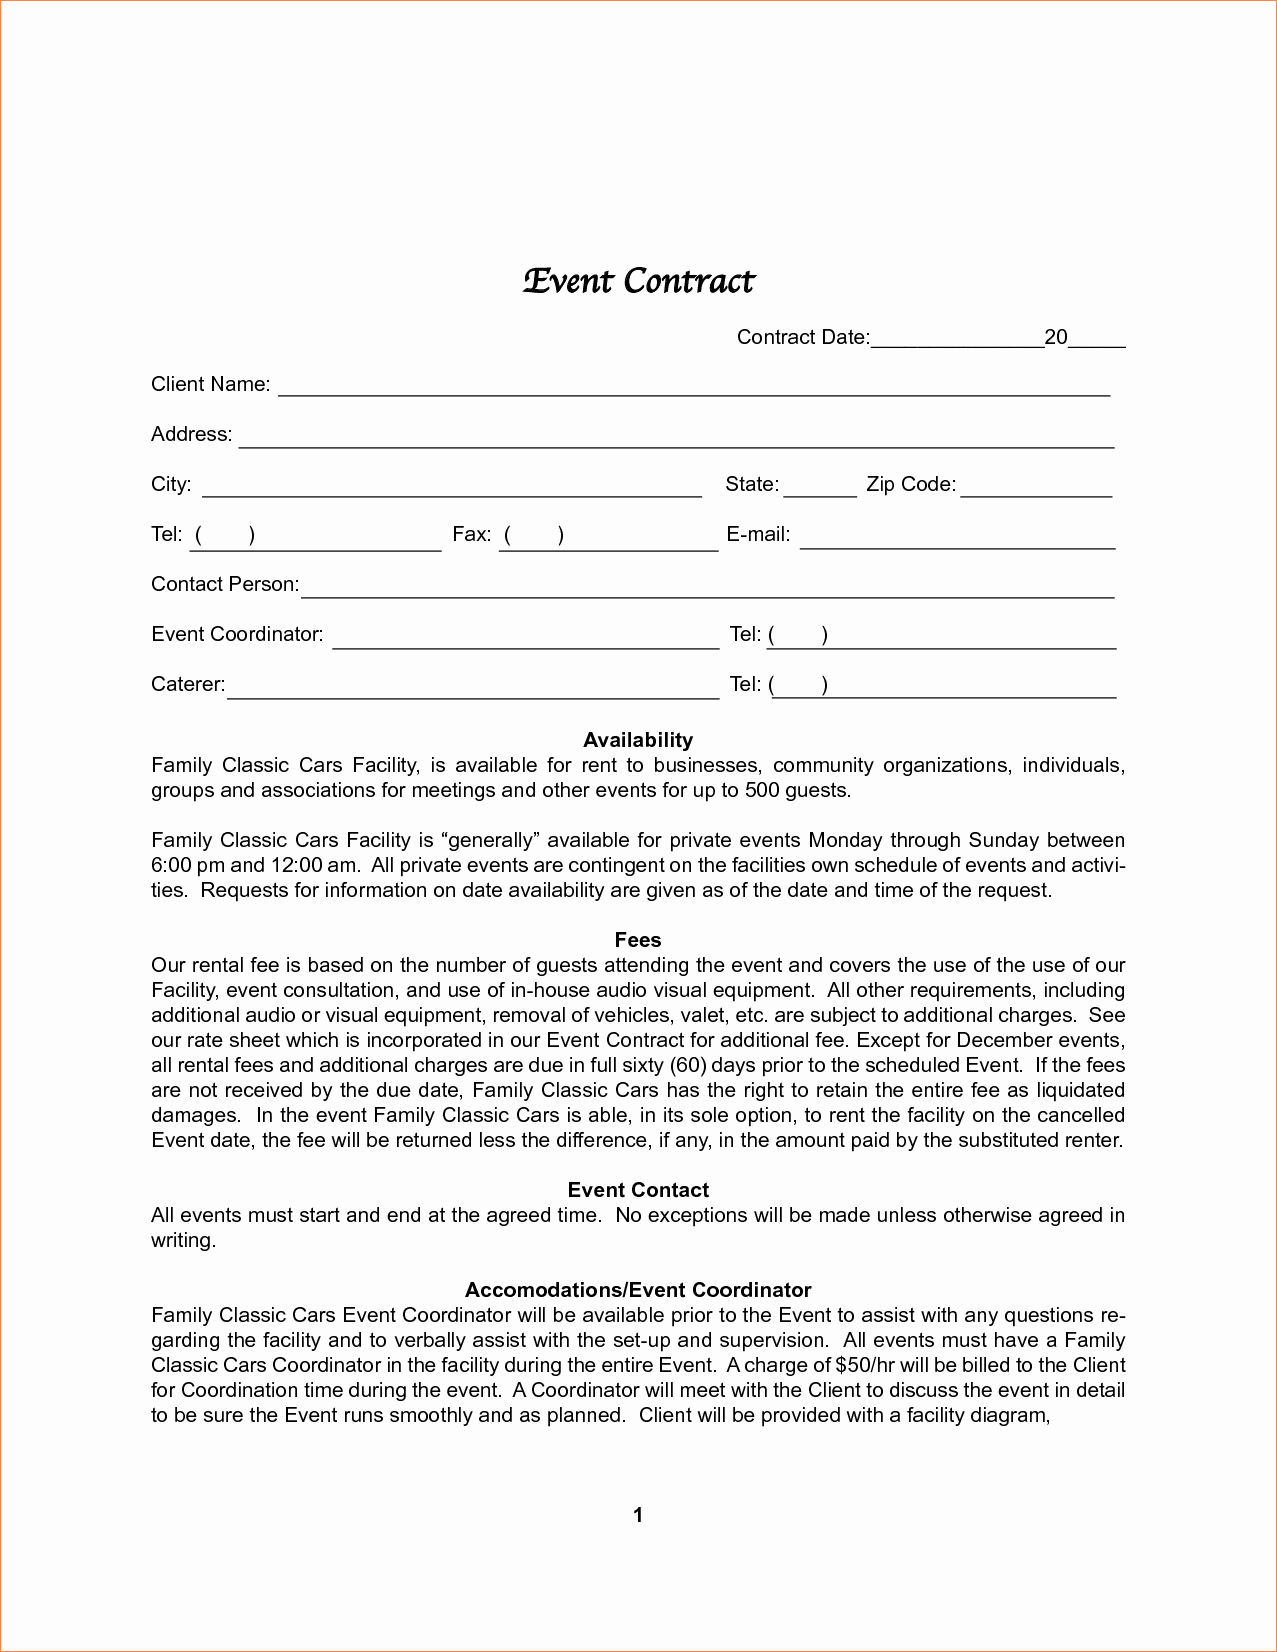 8 event Contract Templatereport Template Document